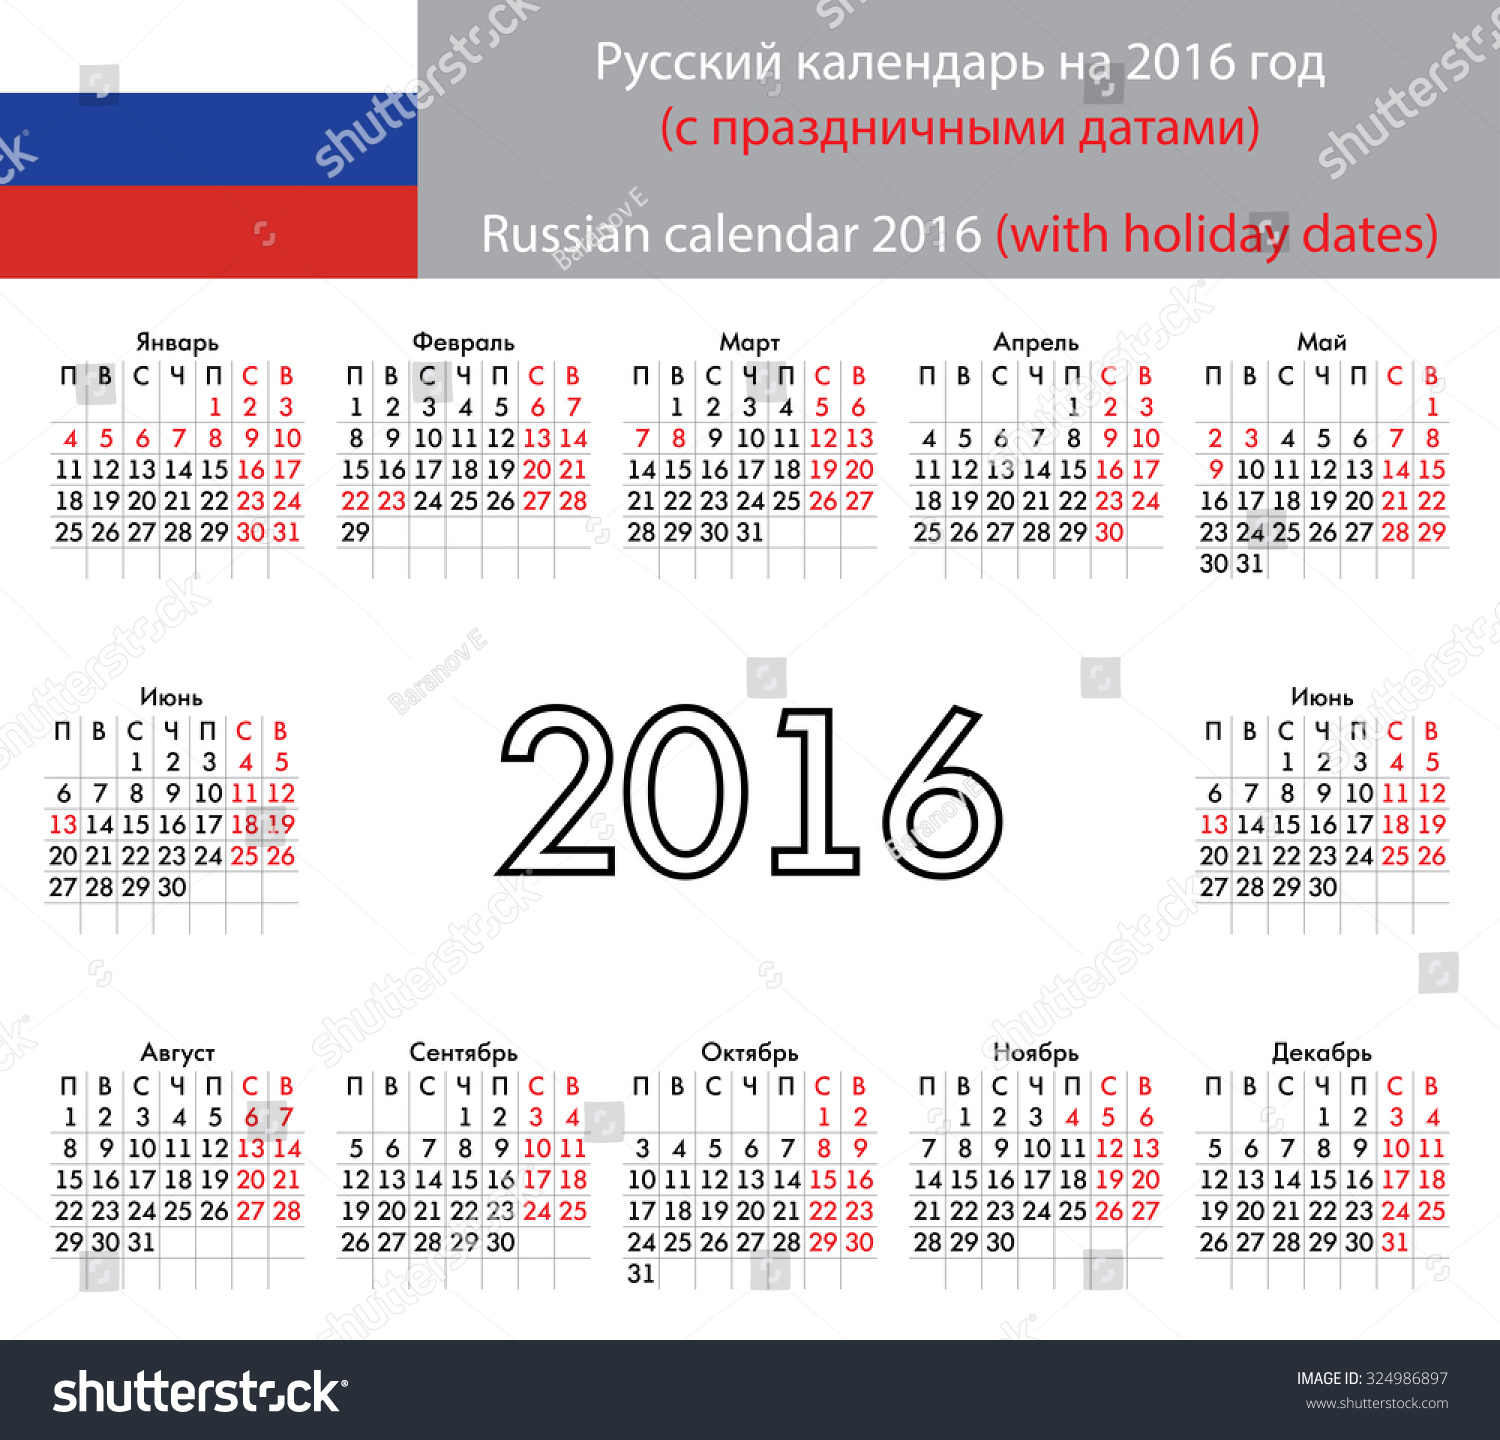 Russian Calendar Grid For 2016 With Noted Russian Holidays And Weekend